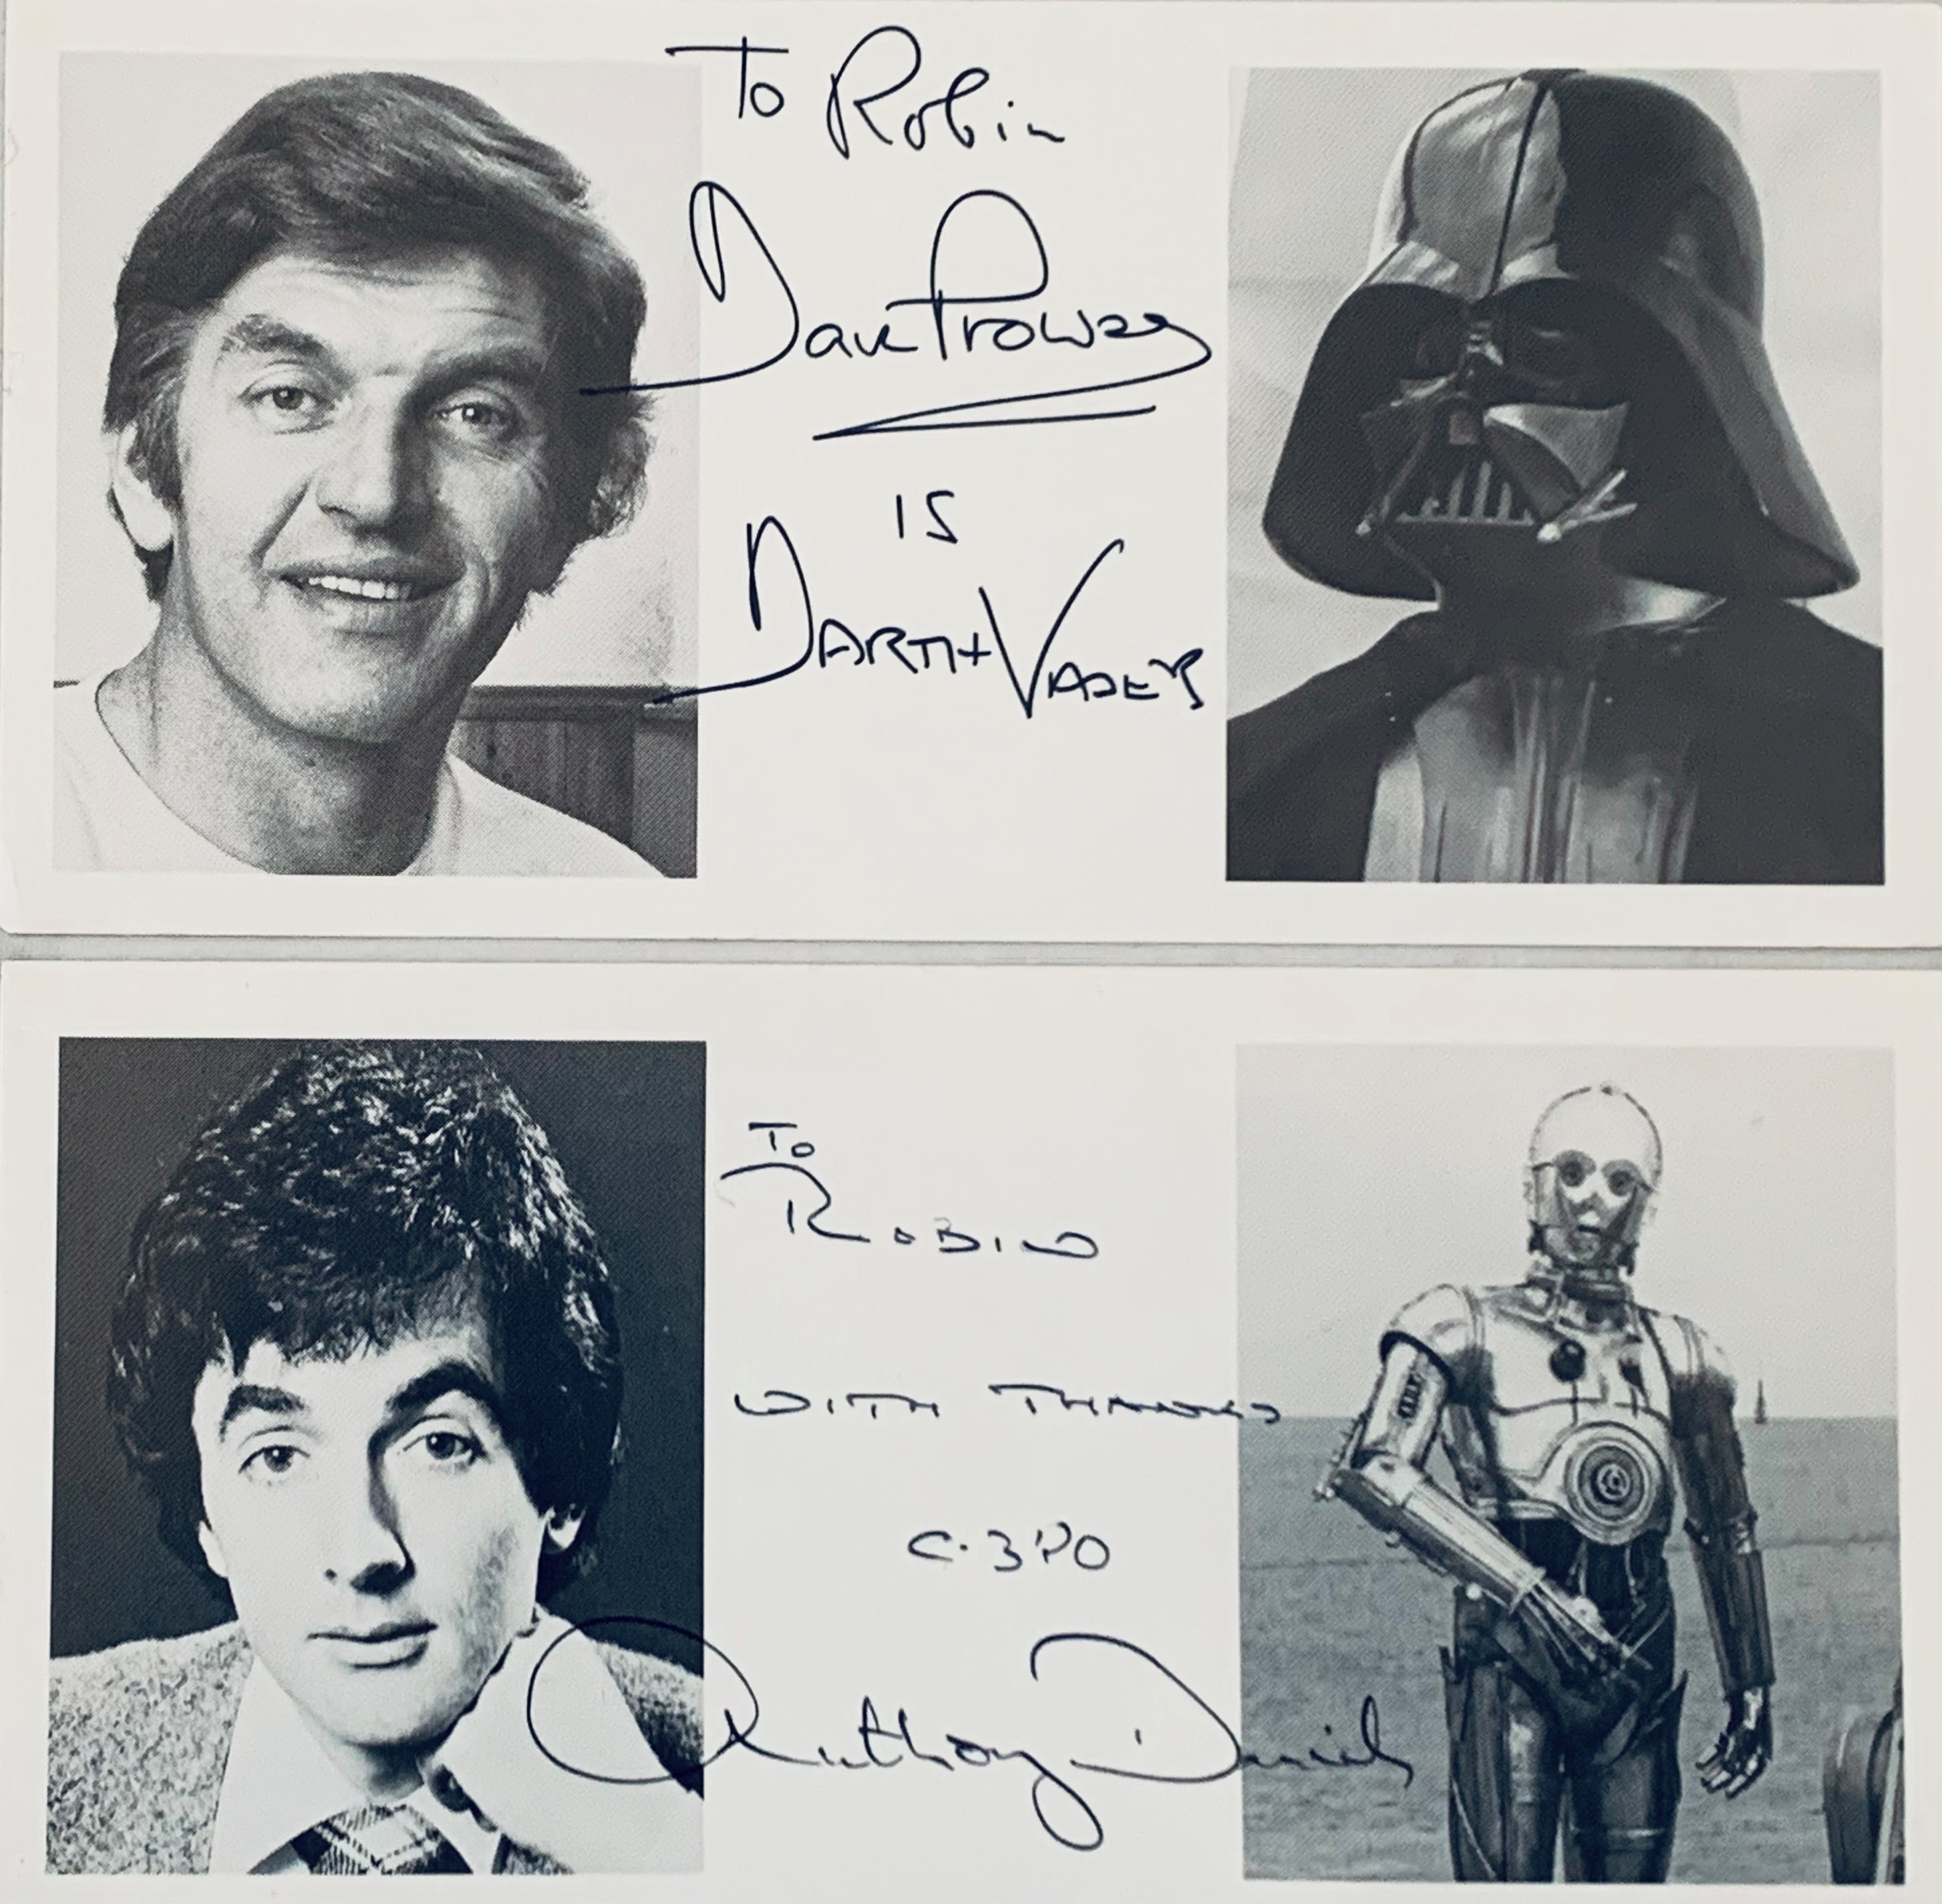 (STAR WARS). Prowse, Dan & Anthony Daniels - STAR WARS: TWO LUCASFILM PROMOTIONAL CARDS SIGNED BY DAN PROWSE (AS DARTH VADER) AND ANTHONY DANIELS (AS C-3PO)